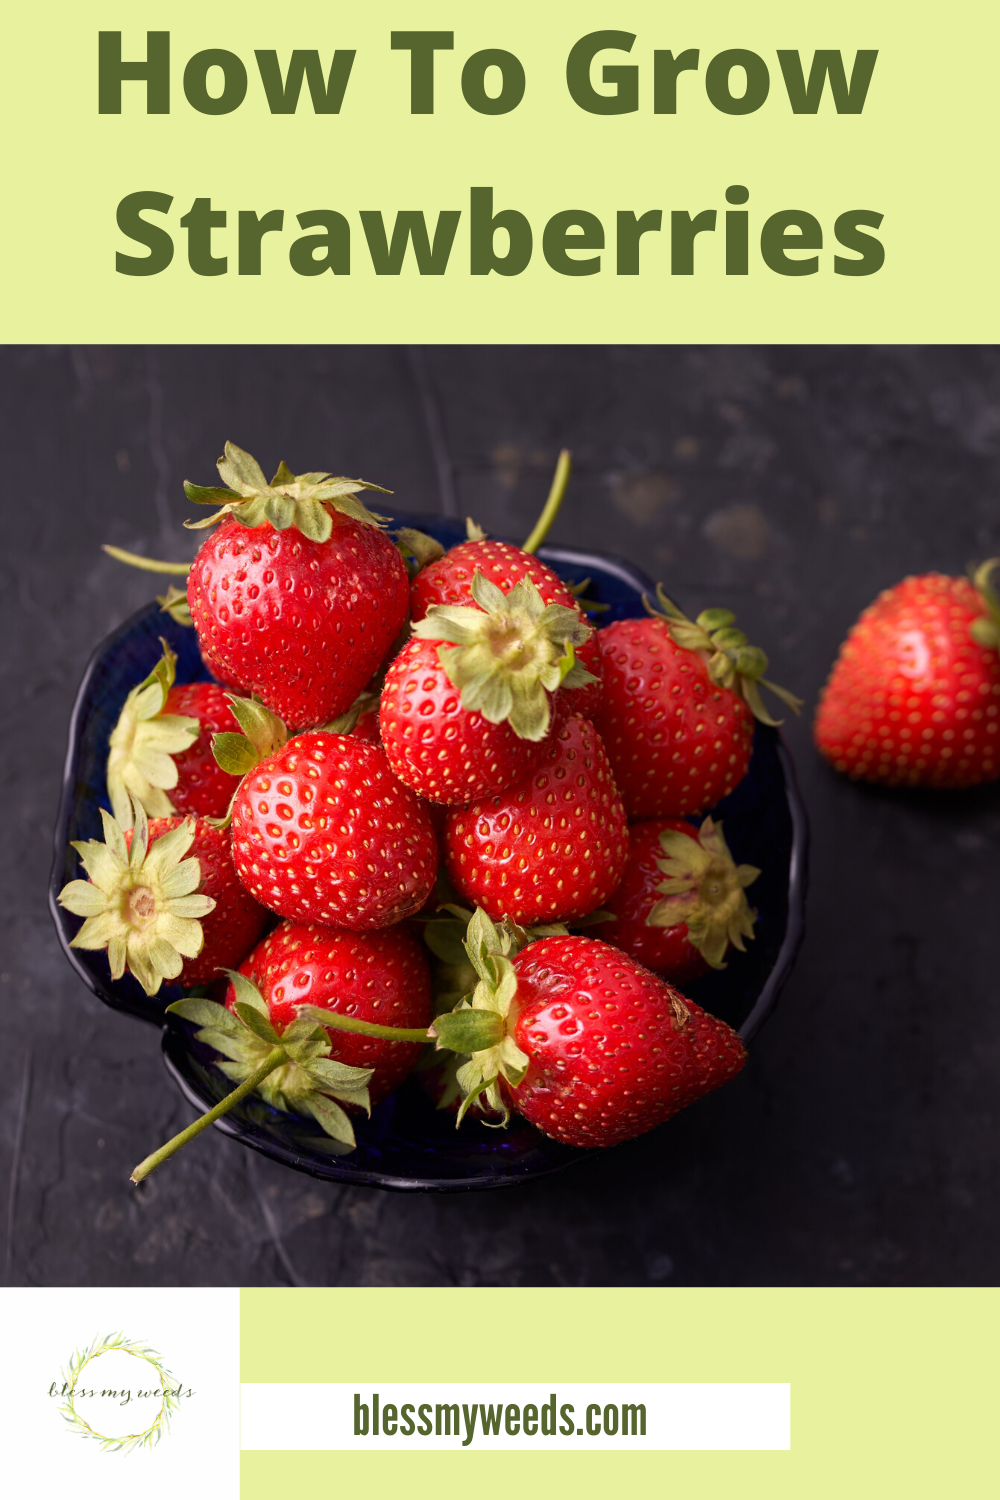 You don't have to have a big space for a garden to grow strawberries. If you have containers or pots, you can grow them. Keep reading for more tips about how to grow sensational strawberries. YUM! #gardeningtips #fruitgardening #strawberries #blessmyweedsblog